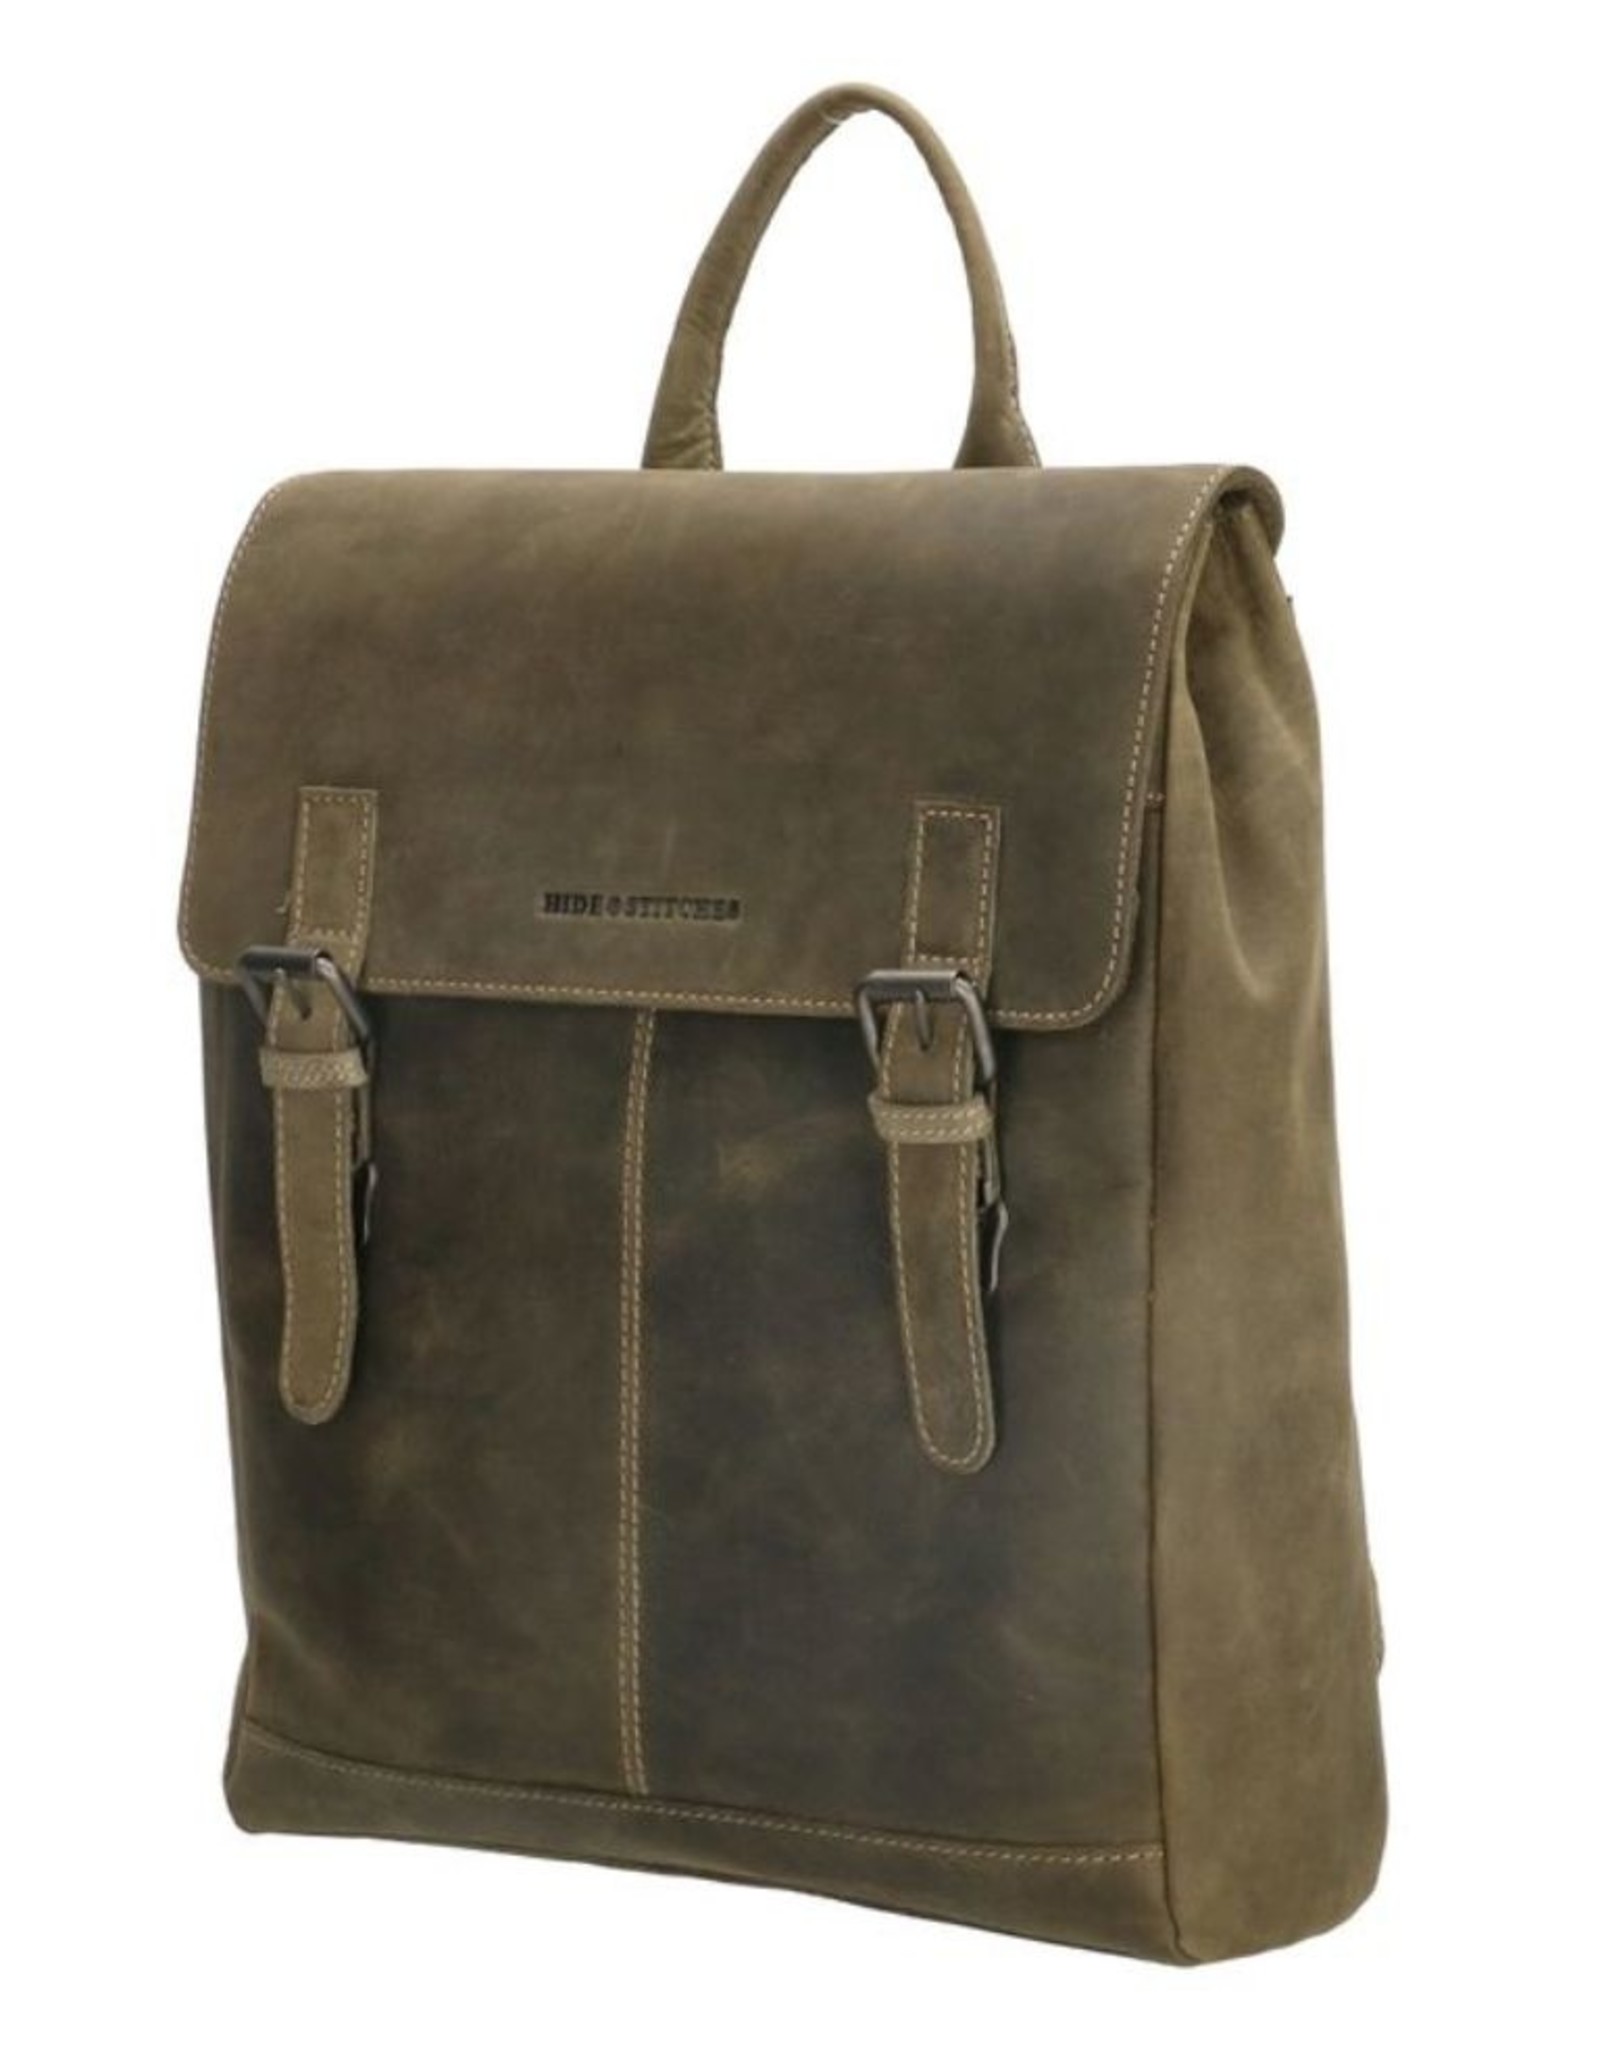 Hide & Stitches Leather backpacks  and leather shoppers - Leather backpack Hide & Stitches Idaho 13,3 inch (33 cm)